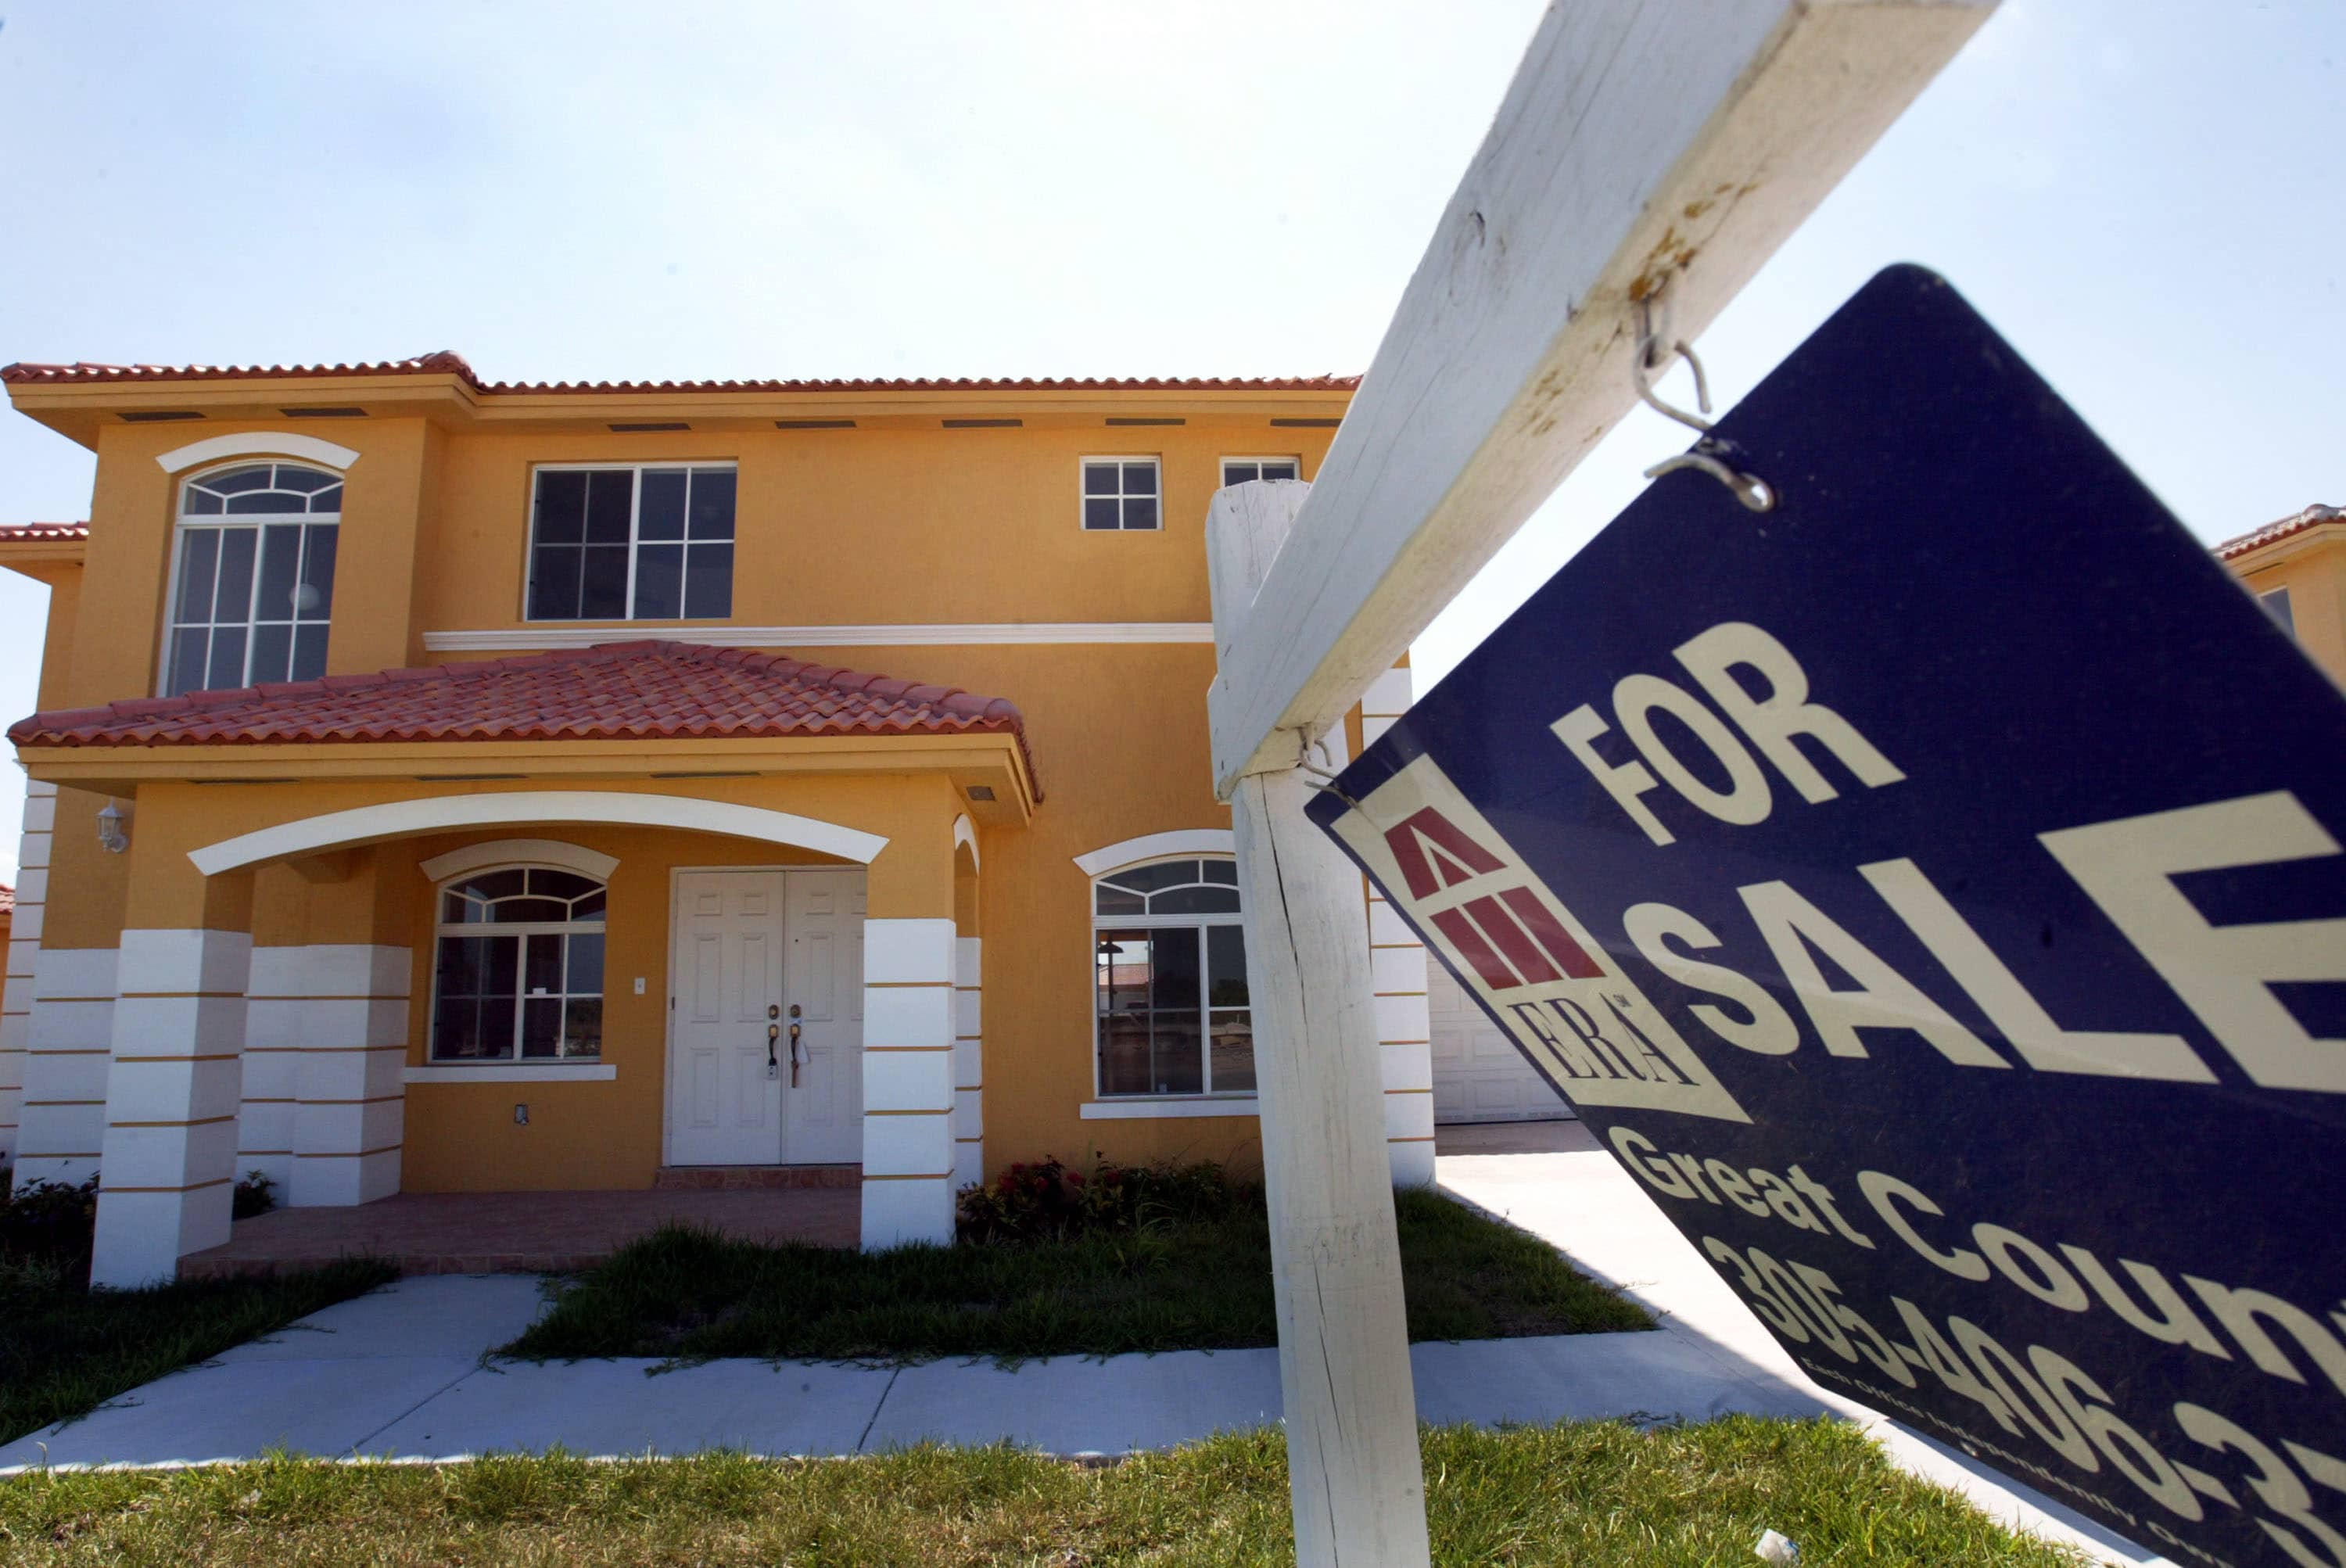 Low mortgage rates pull buyers back into the housing market